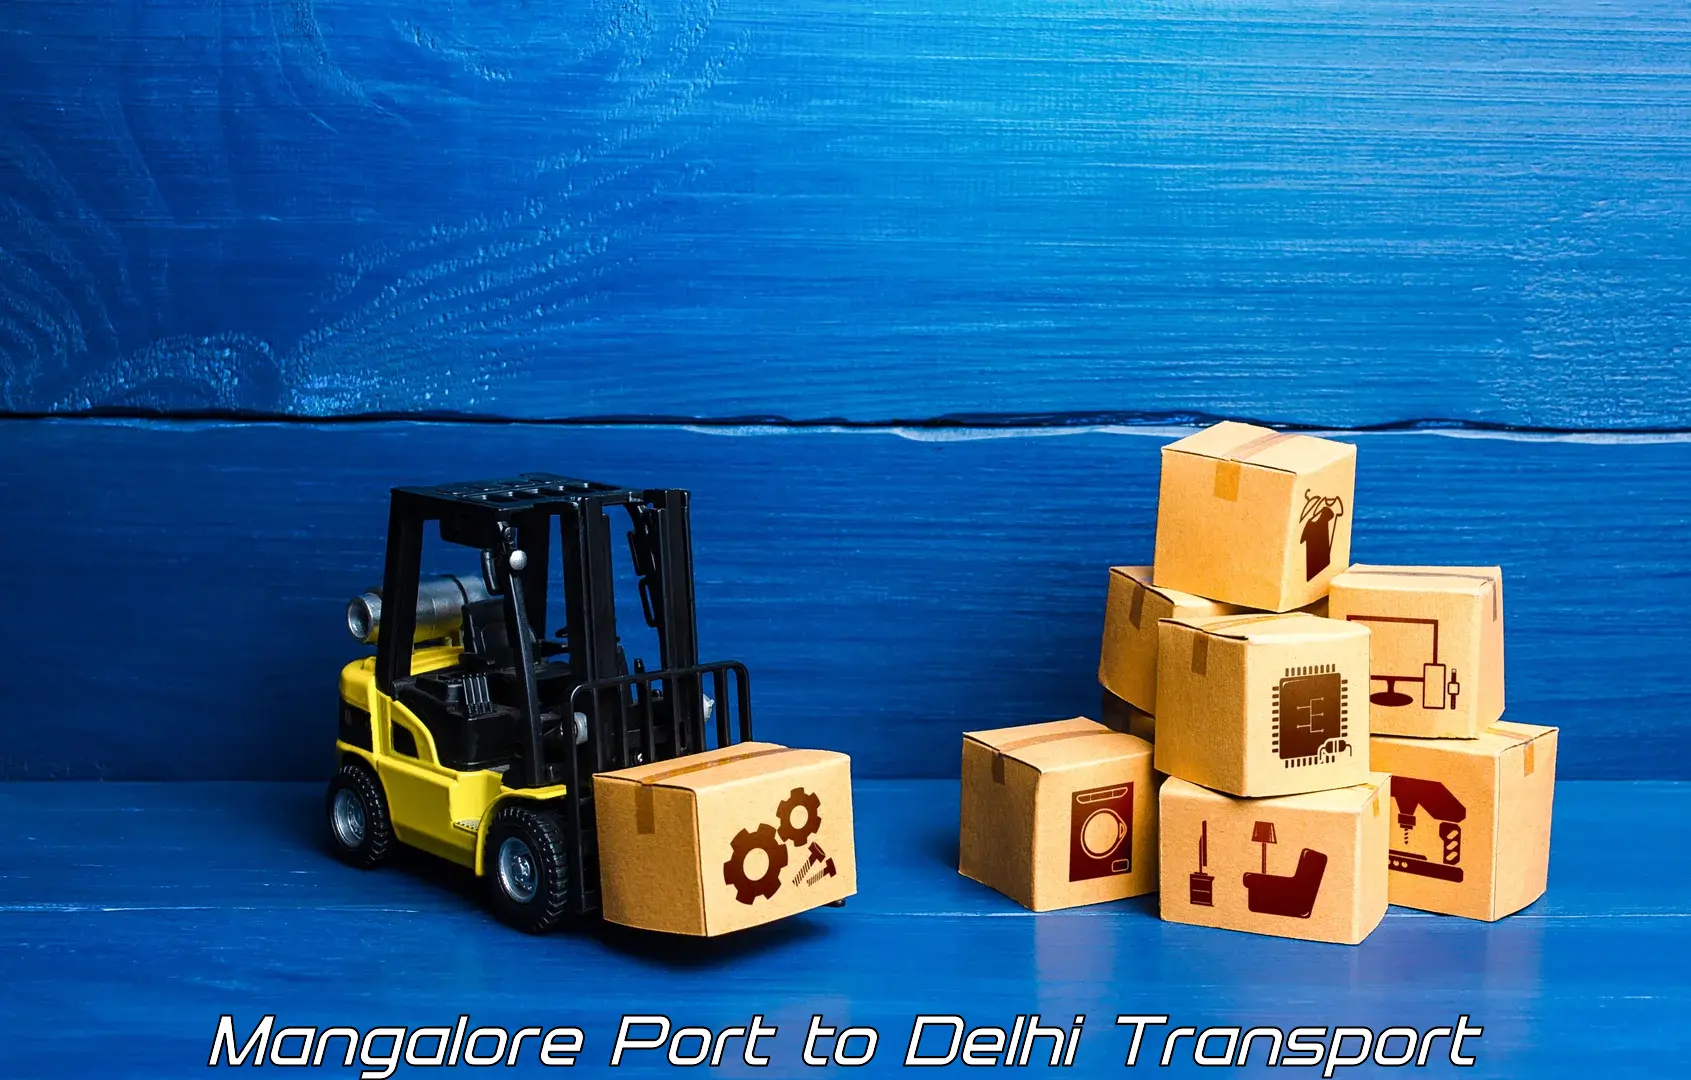 Transport bike from one state to another Mangalore Port to IIT Delhi